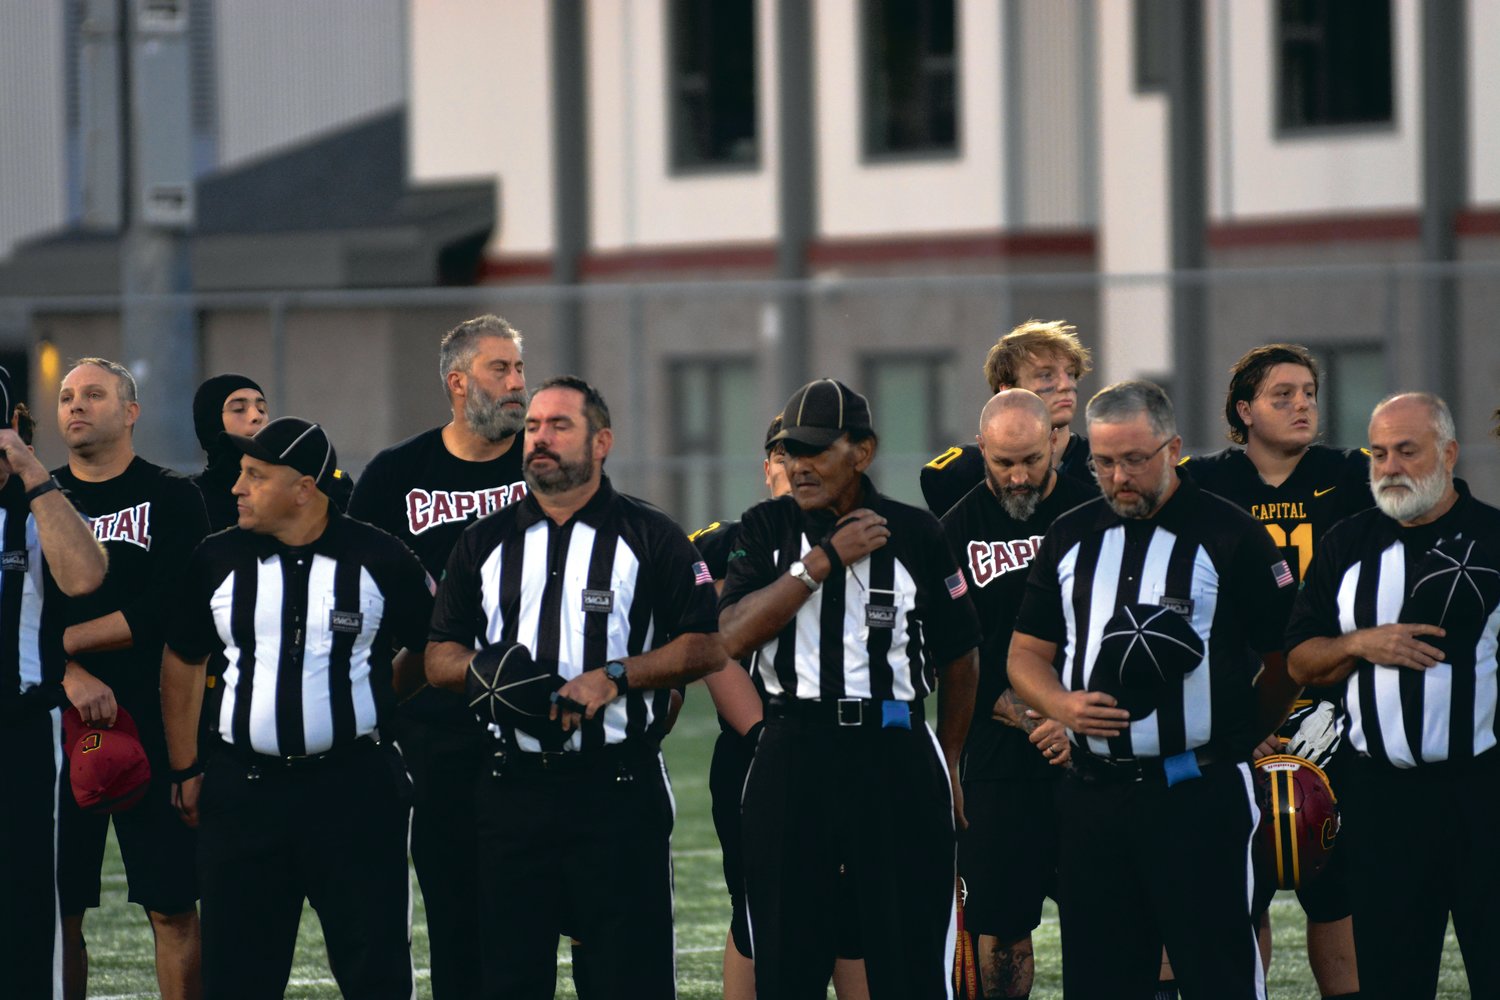 Officials pay their respects during a moment of silence for Mike Kain at Ingersoll Stadium on Sept. 29.